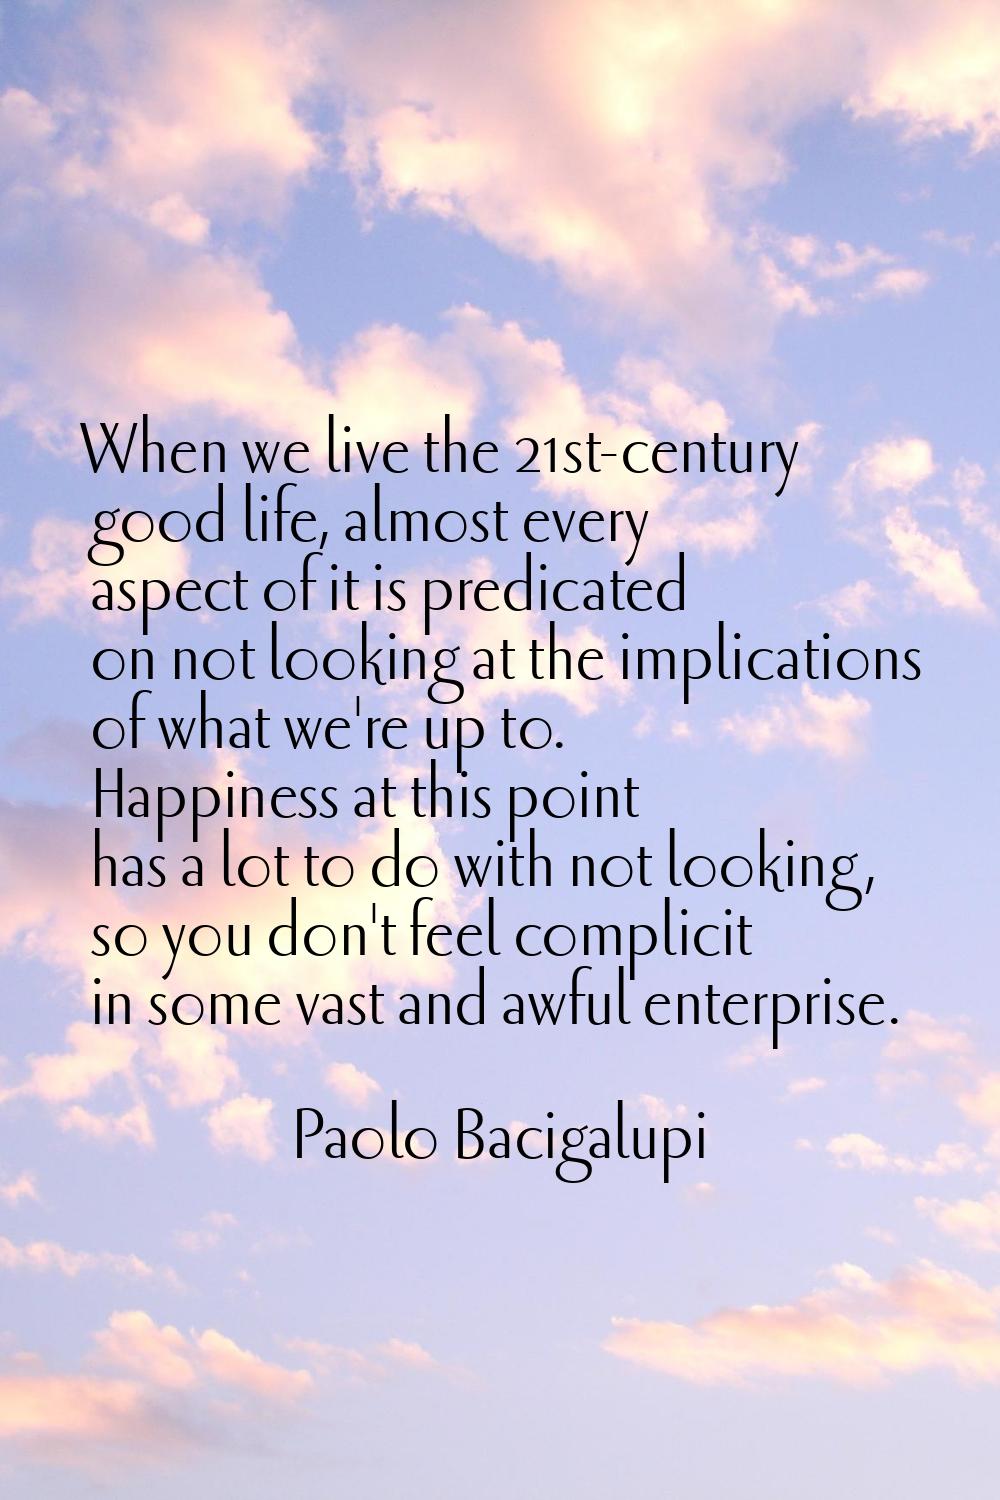 When we live the 21st-century good life, almost every aspect of it is predicated on not looking at 